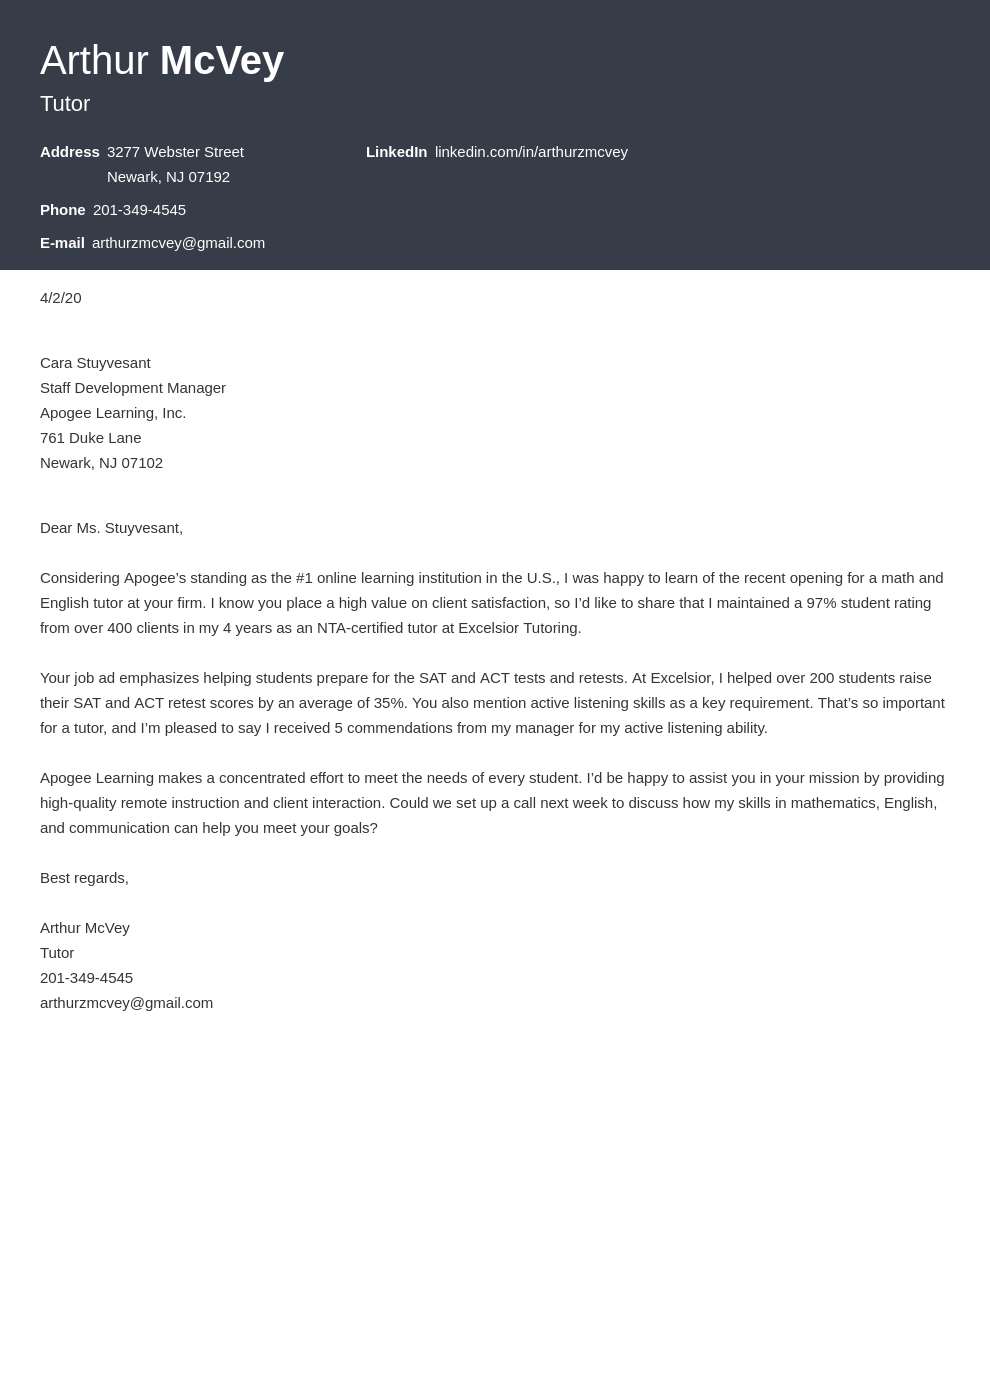 How to Write a Formal Cover Letter: Examples, Format & Guide